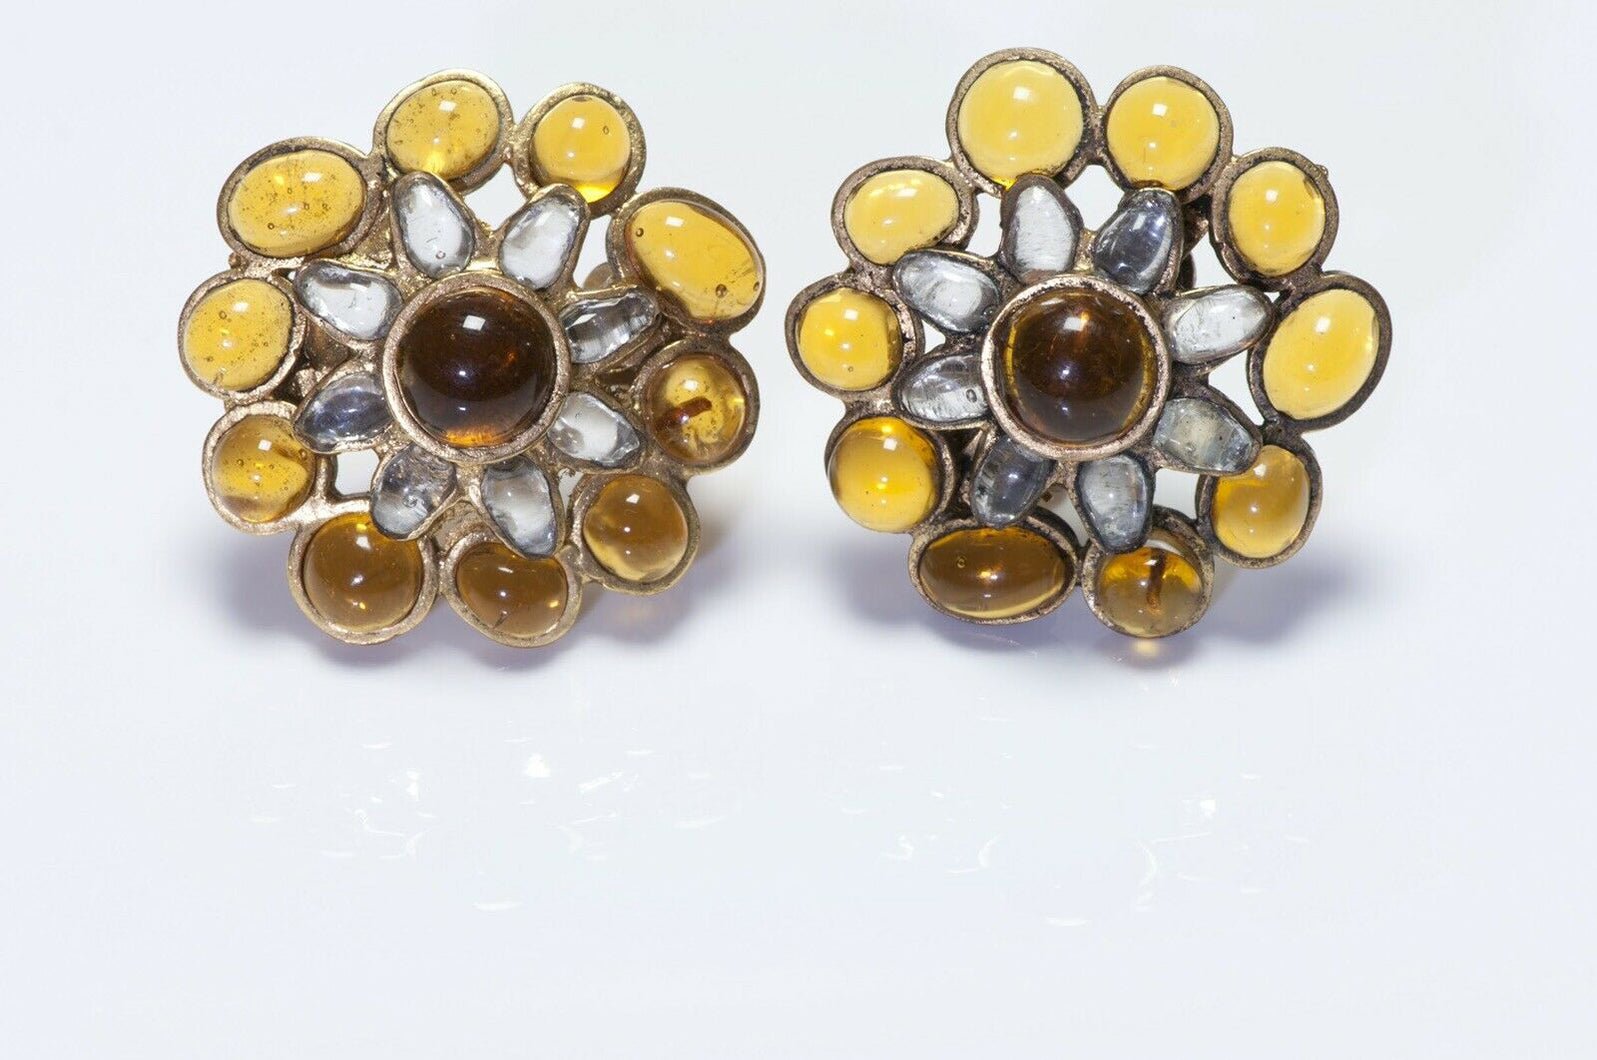 CHANEL 1994 Maison Gripoix Yellow Glass Camellia Flower Earrings - DSF Antique Jewelry